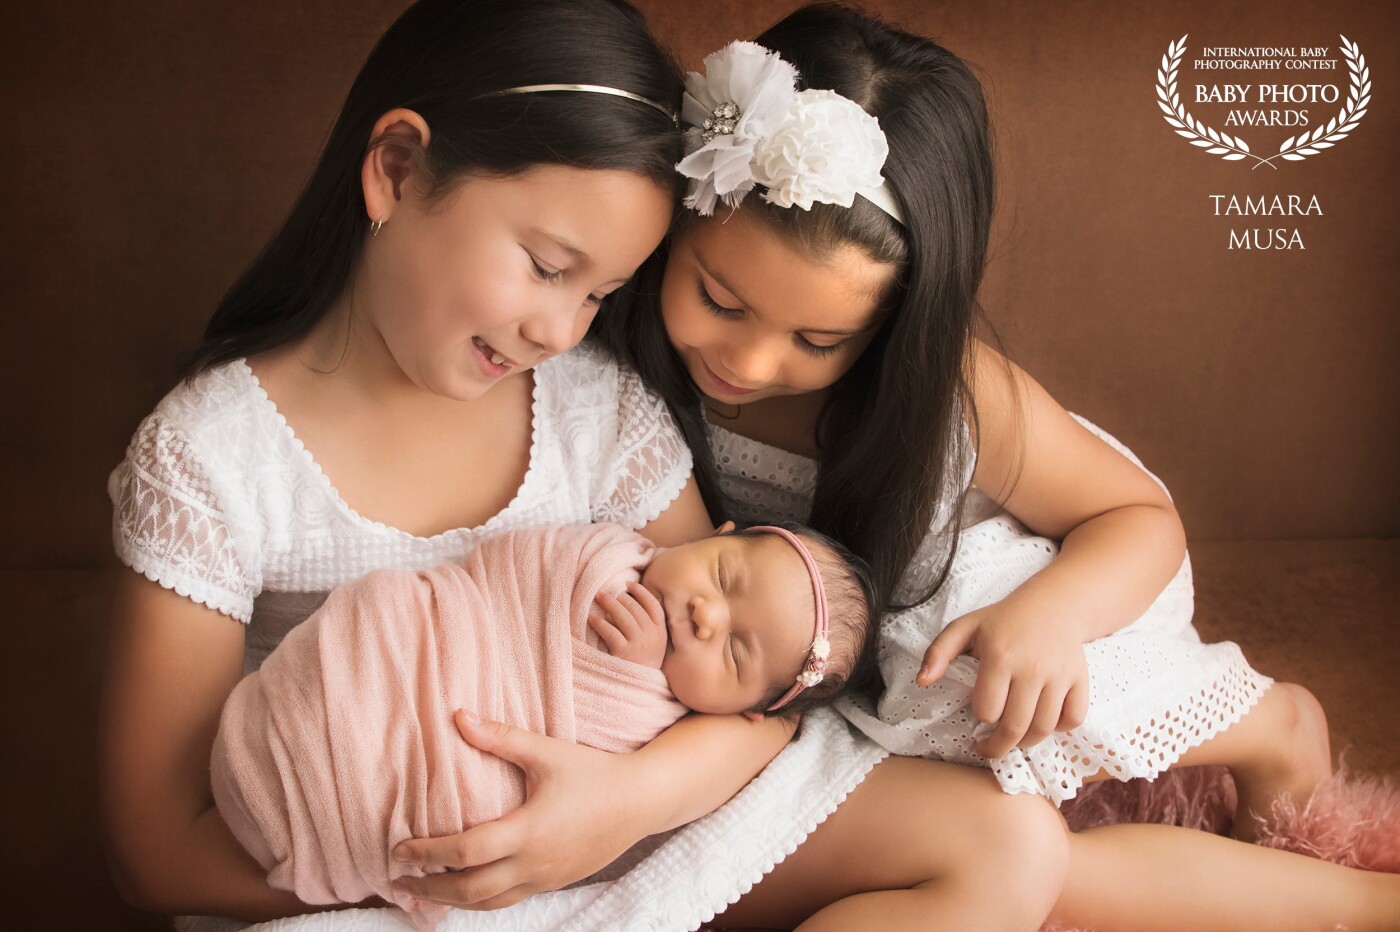 How lucky is Mum to have these 3 beautiful girls! I loved capturing the sweet bond between these 3 sisters. I had planned this image in my head and it turned out even better than I had imagined!